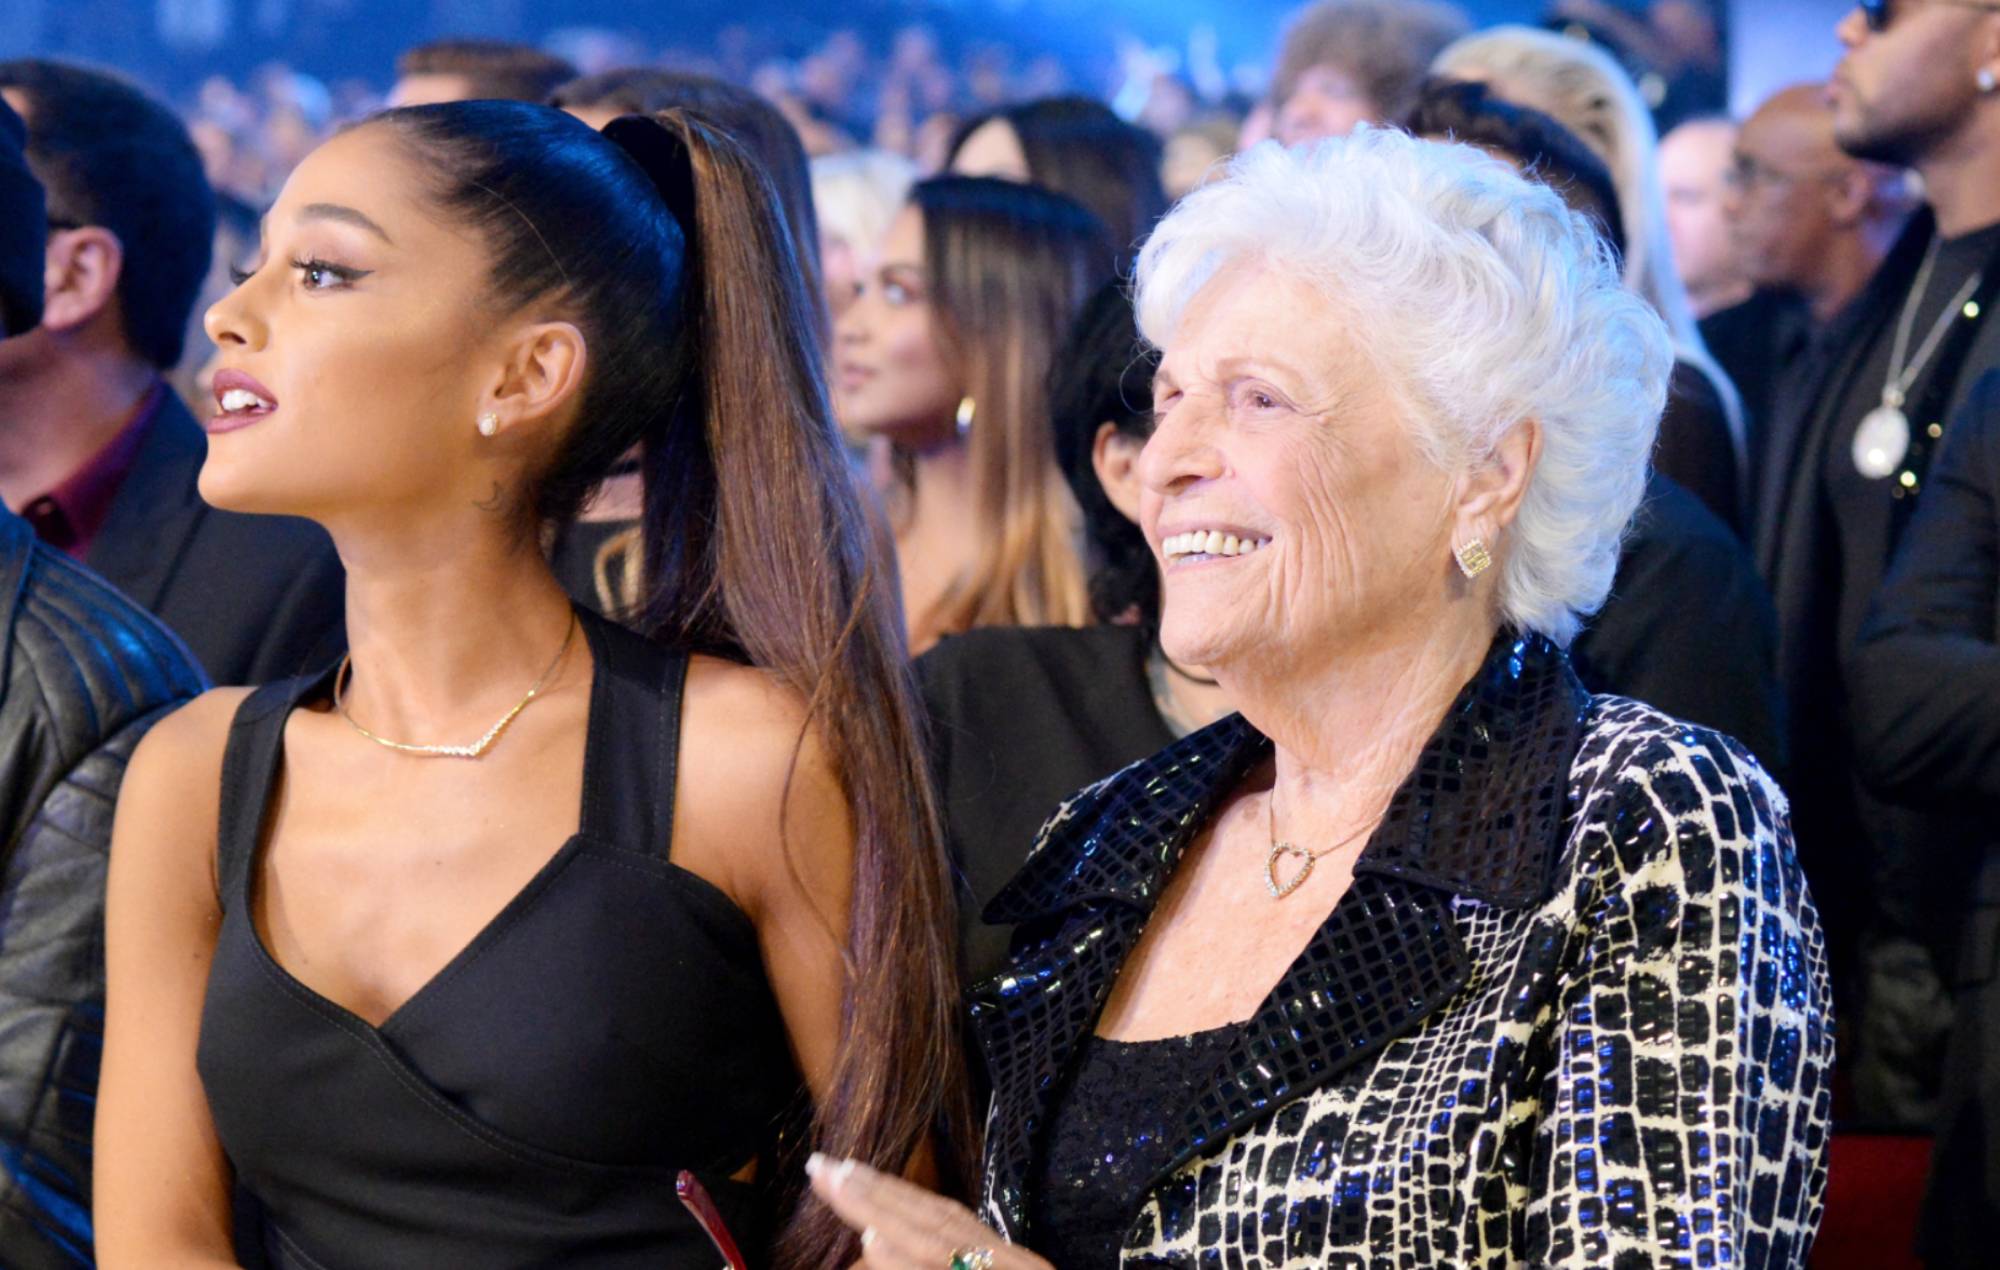 Ariana Grande (L) and Marjorie 'Nonna' Grande attend the 2016 American Music Awards at Microsoft Theater on November 20, 2016 in Los Angeles, California. (Photo by Kevin Mazur/AMA2016/WireImage)